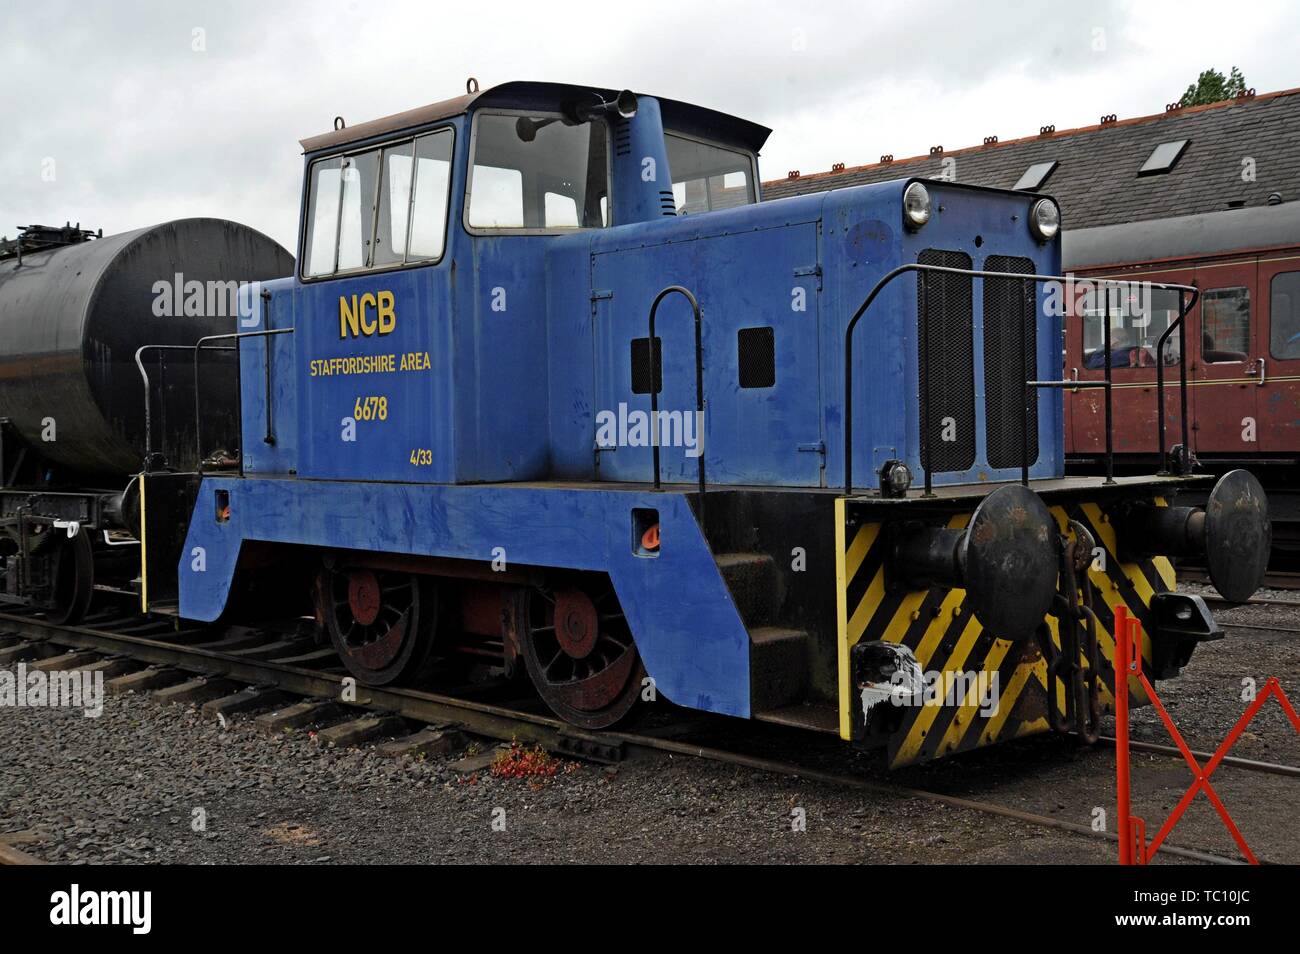 Hunslet 0-4-0 DH No. 6678, ex NCB coal board shunter built in 1968, at the Chasewater Light Railway, Cannock Stock Photo